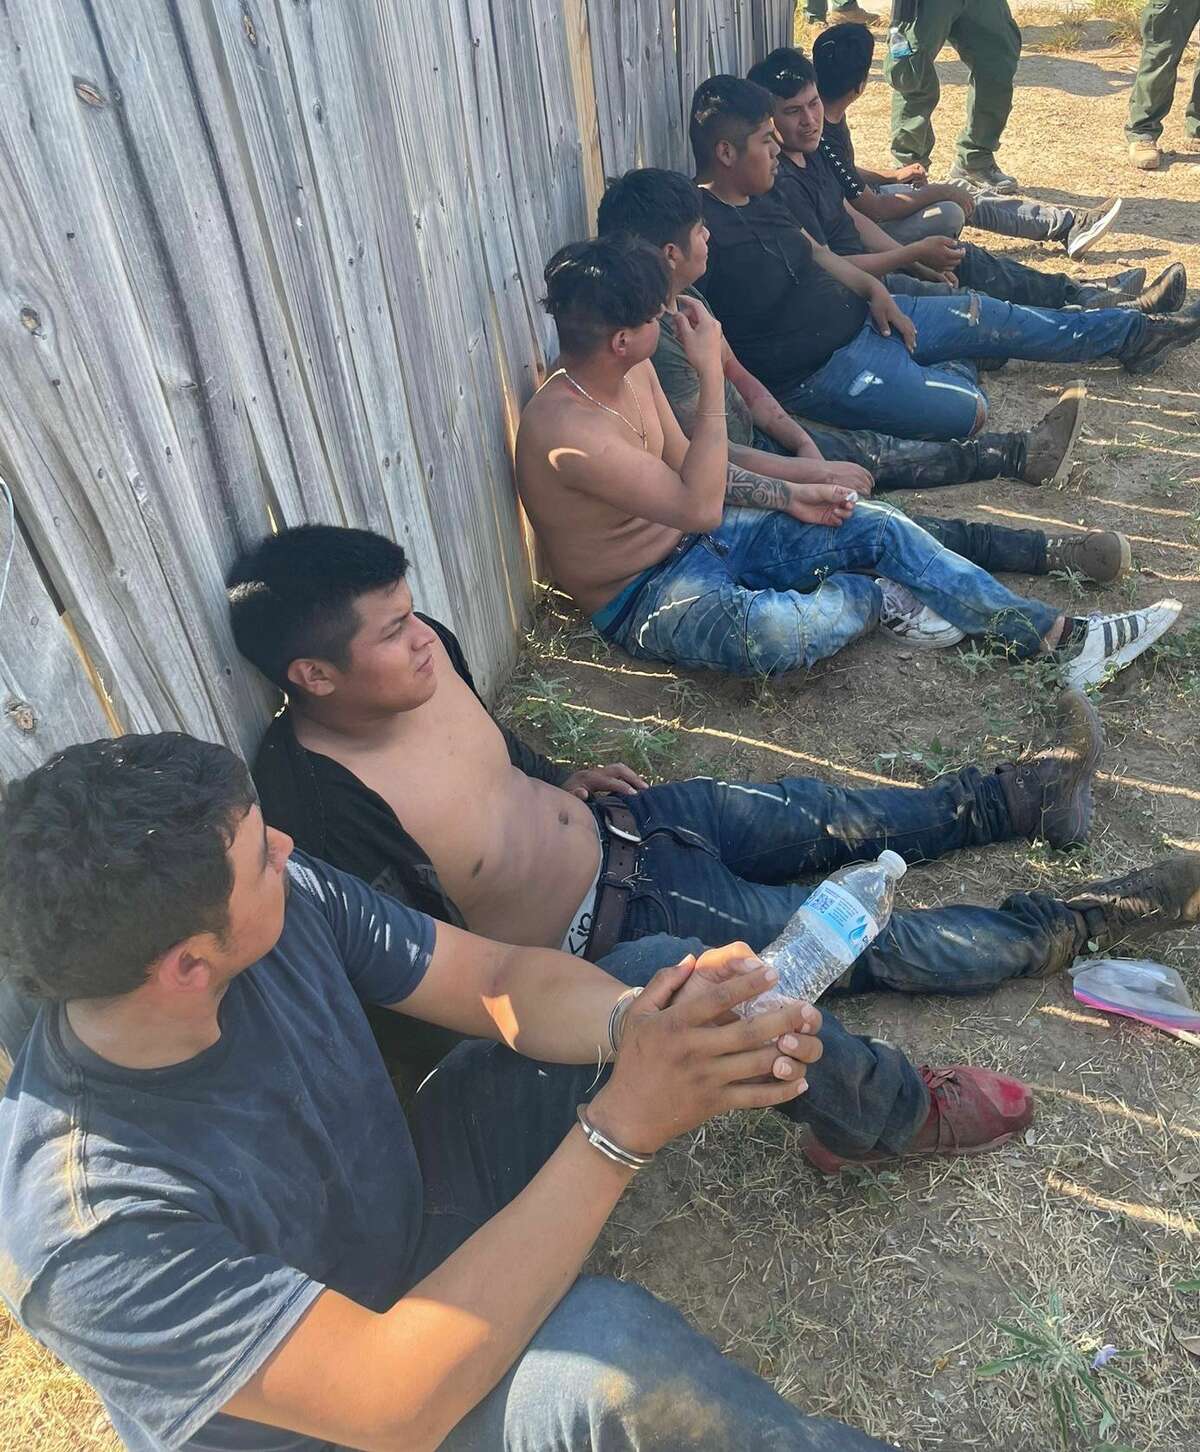 A human smuggling attempt ended with a crash that injured multiple migrants on Wednesday afternoon at the intersection of Riverhill Loop and Daffodil Avenue.